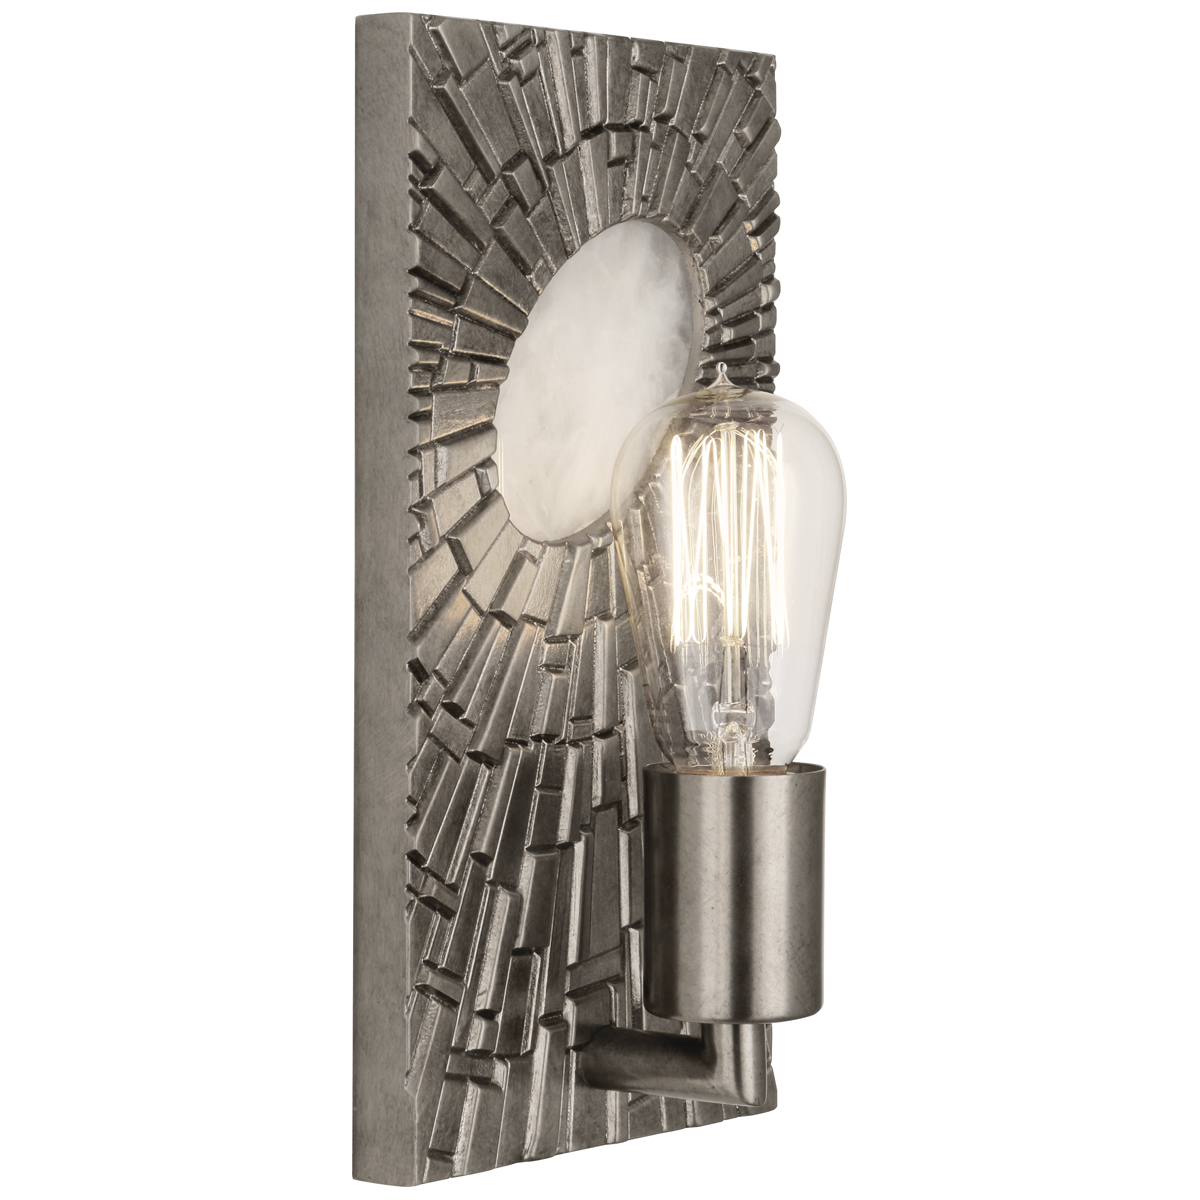 Goliath Wall Sconce Style #S418